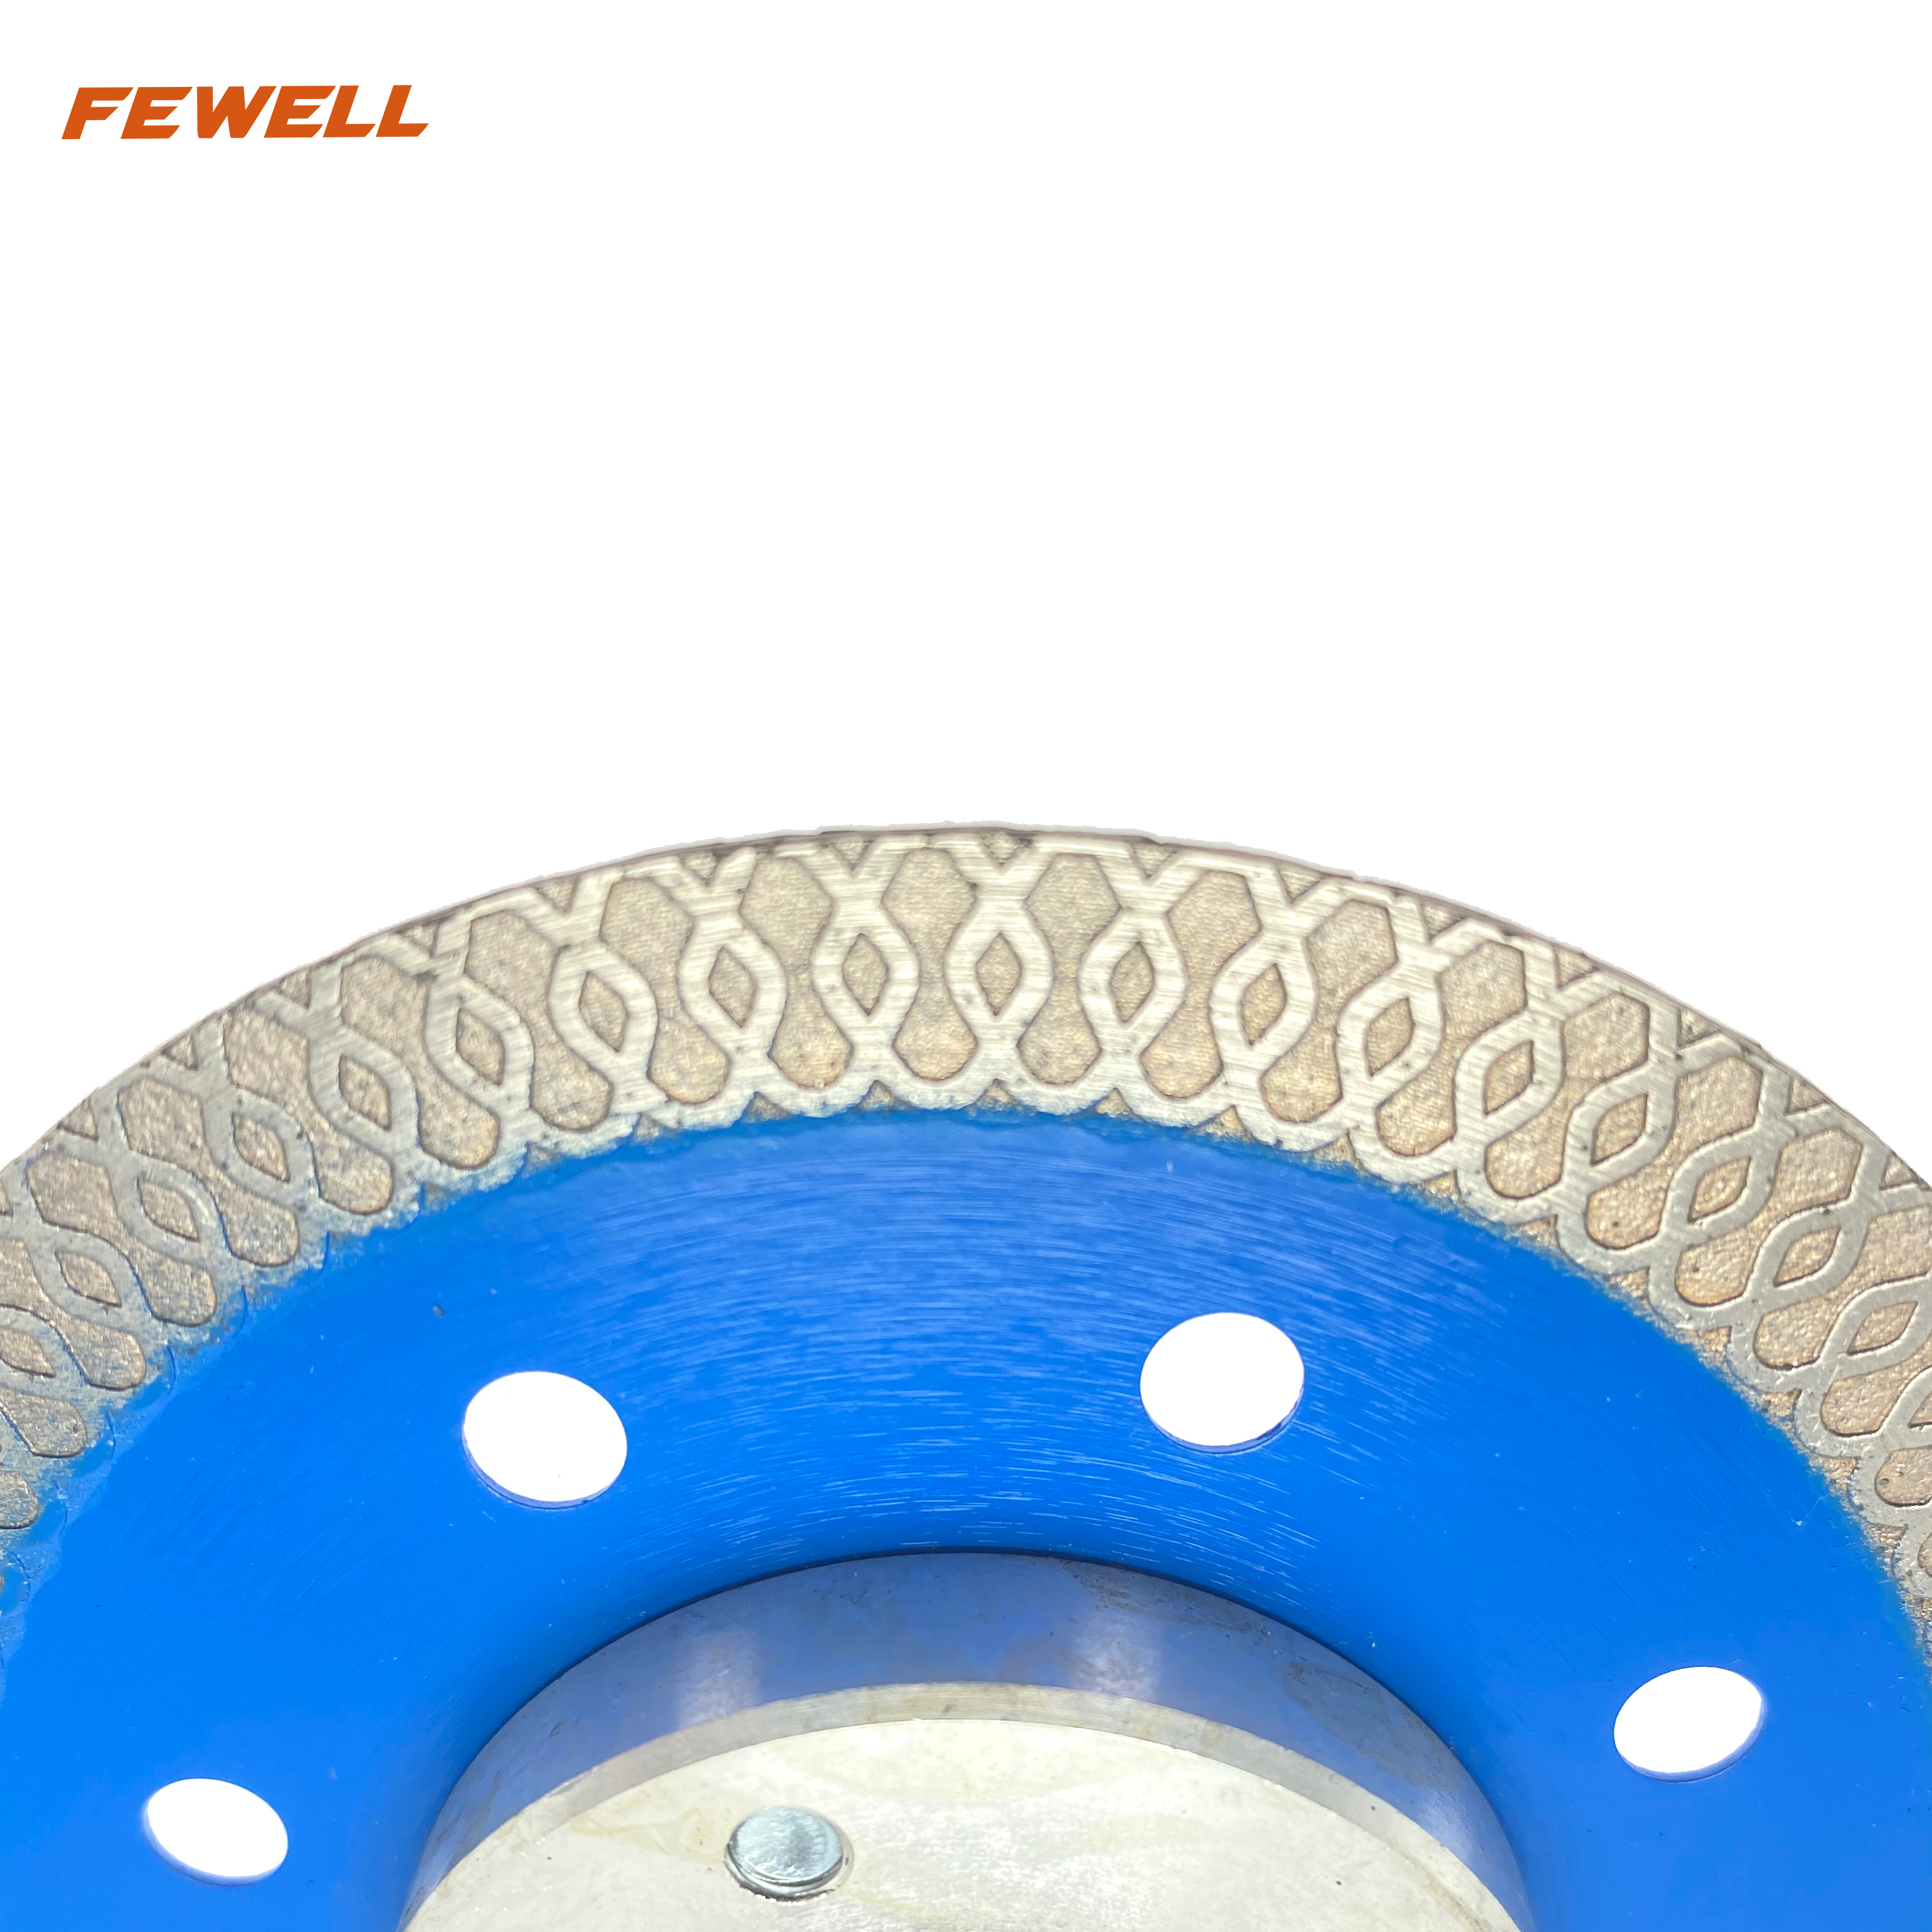 High quality hot press 4-9inch 105-230*10mm height Aluminum flange super ultra thin X turbo diamond saw blade for cutting ceramic tile porcelain